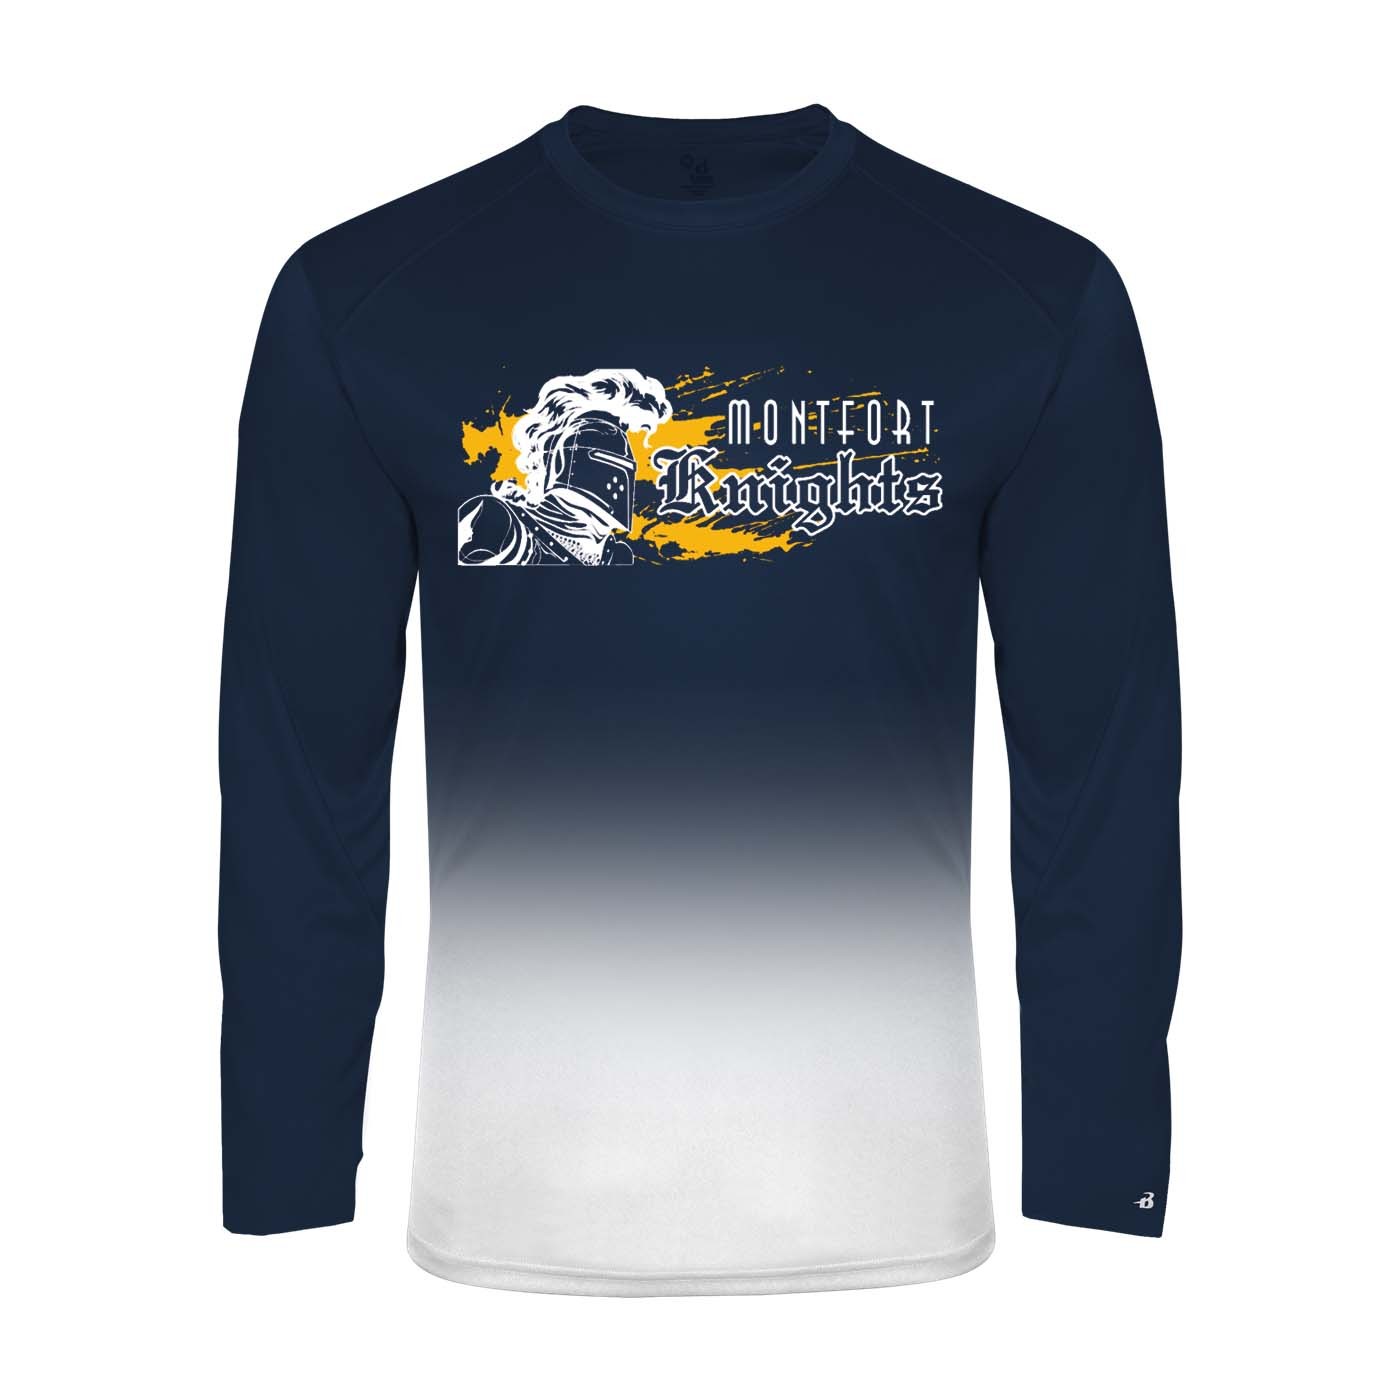 MONTFORT Ombre L/S Spirit T-Shirt w/ White Knight Logo - Please Allow 2-3 Weeks for Delivery